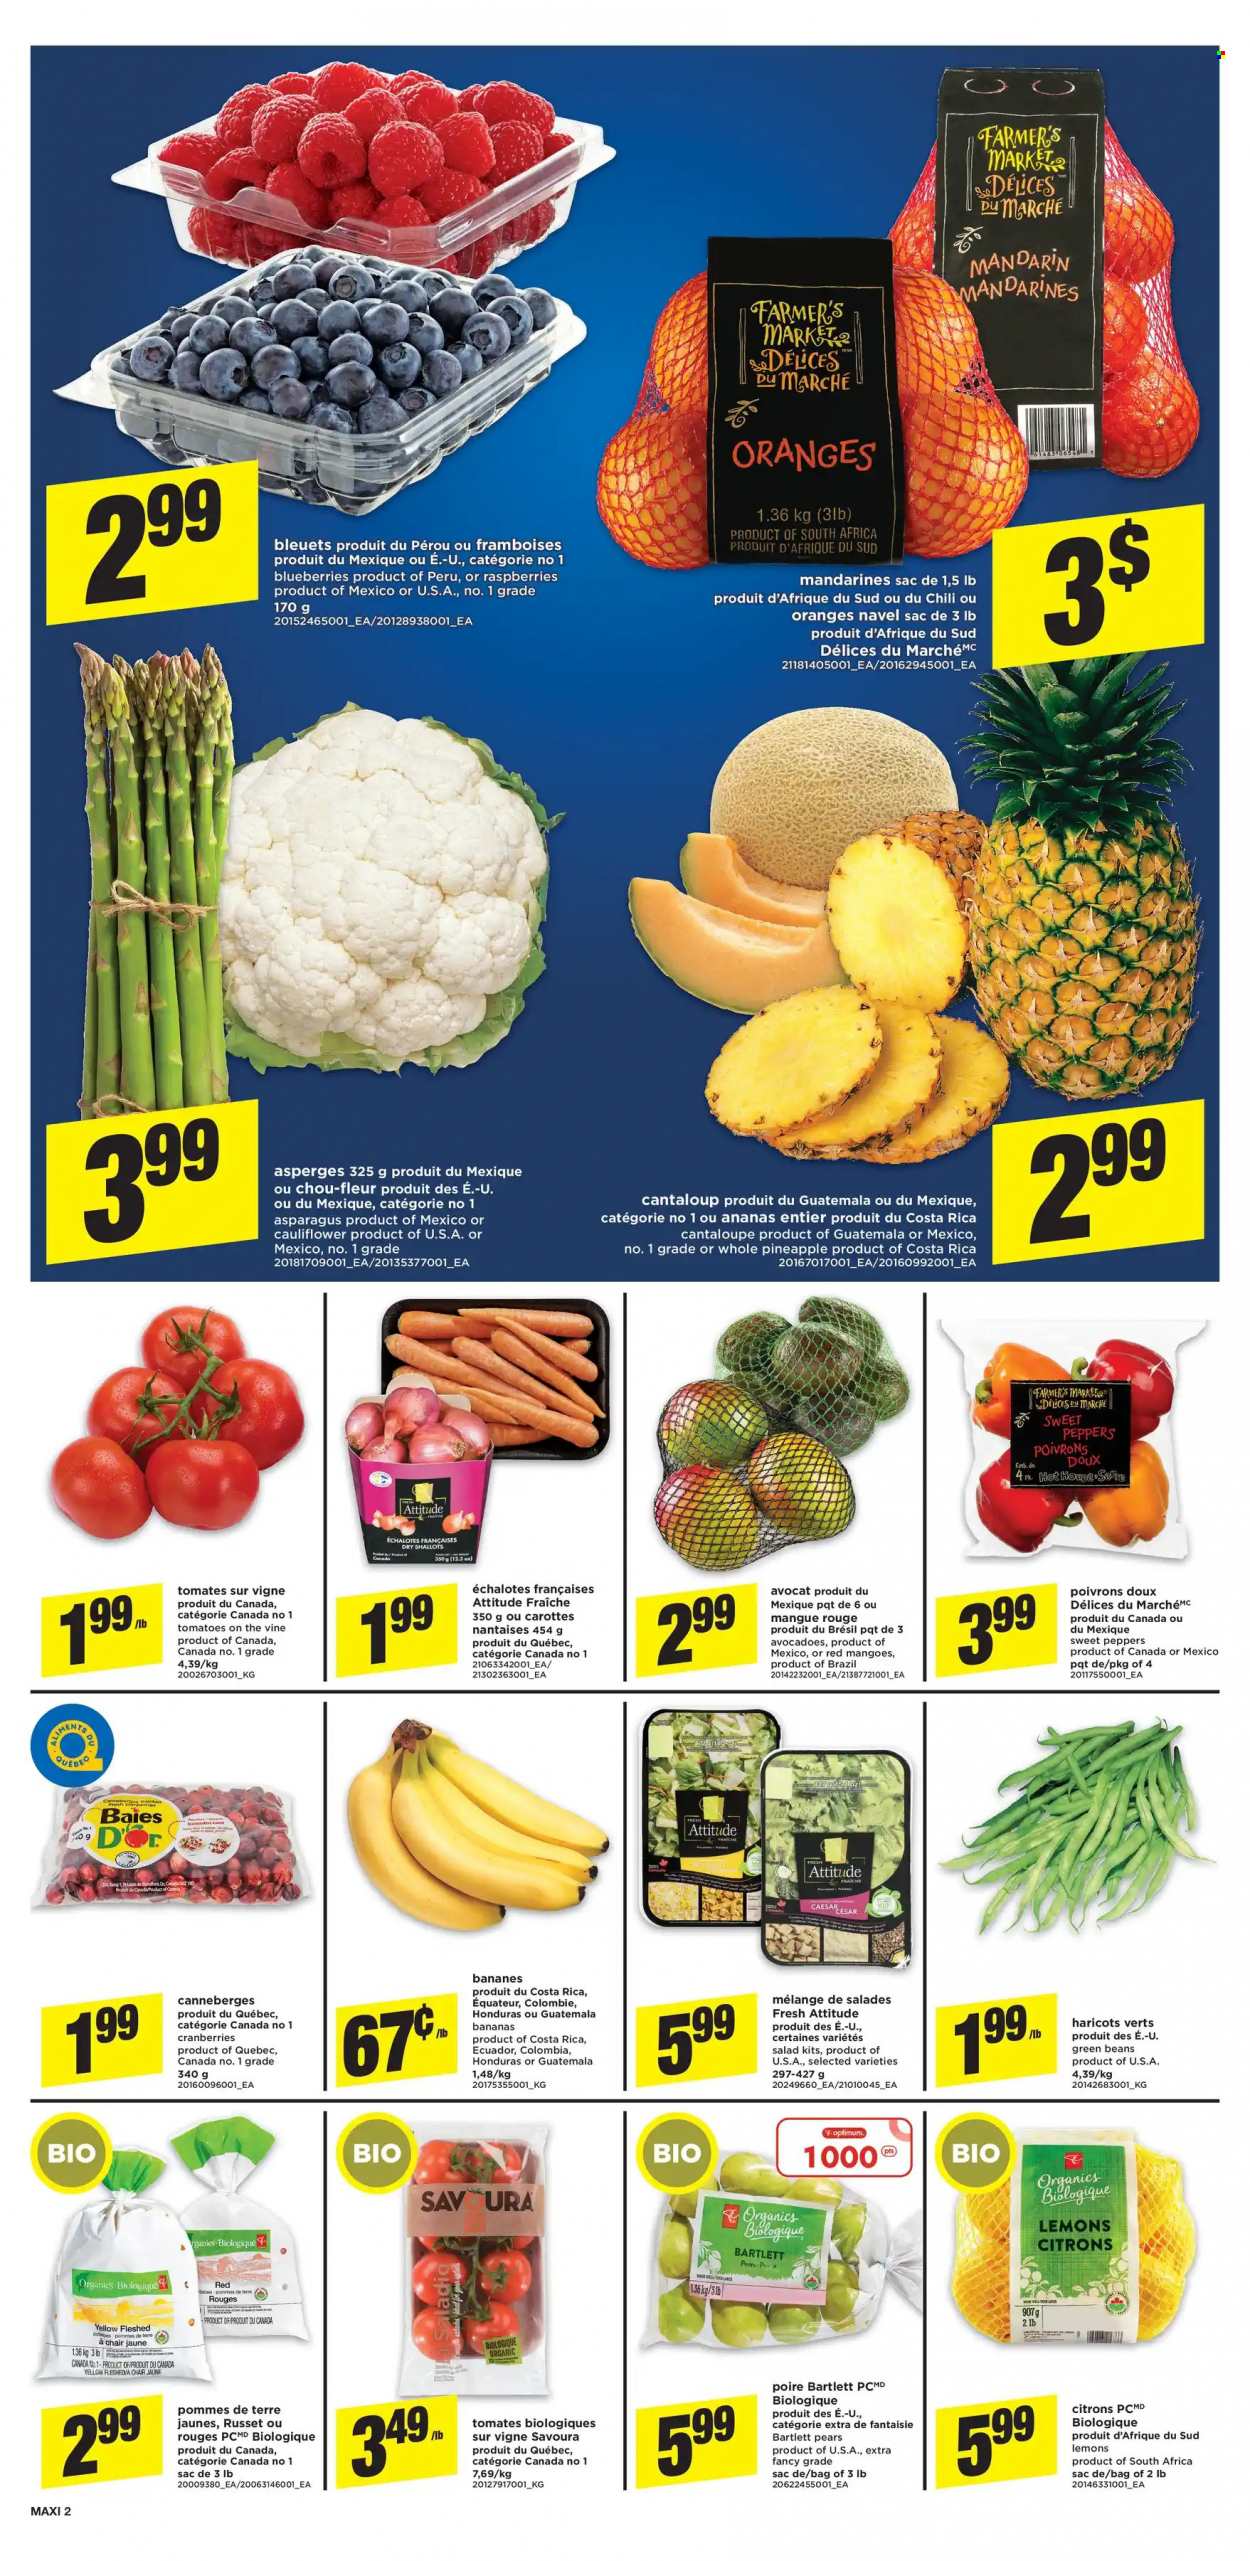 thumbnail - Maxi & Cie Flyer - November 25, 2021 - December 01, 2021 - Sales products - asparagus, beans, cantaloupe, cauliflower, green beans, russet potatoes, shallots, sweet peppers, tomatoes, potatoes, salad, peppers, bananas, Bartlett pears, blueberries, mandarines, pineapple, pears, lemons, cranberries, oranges. Page 3.